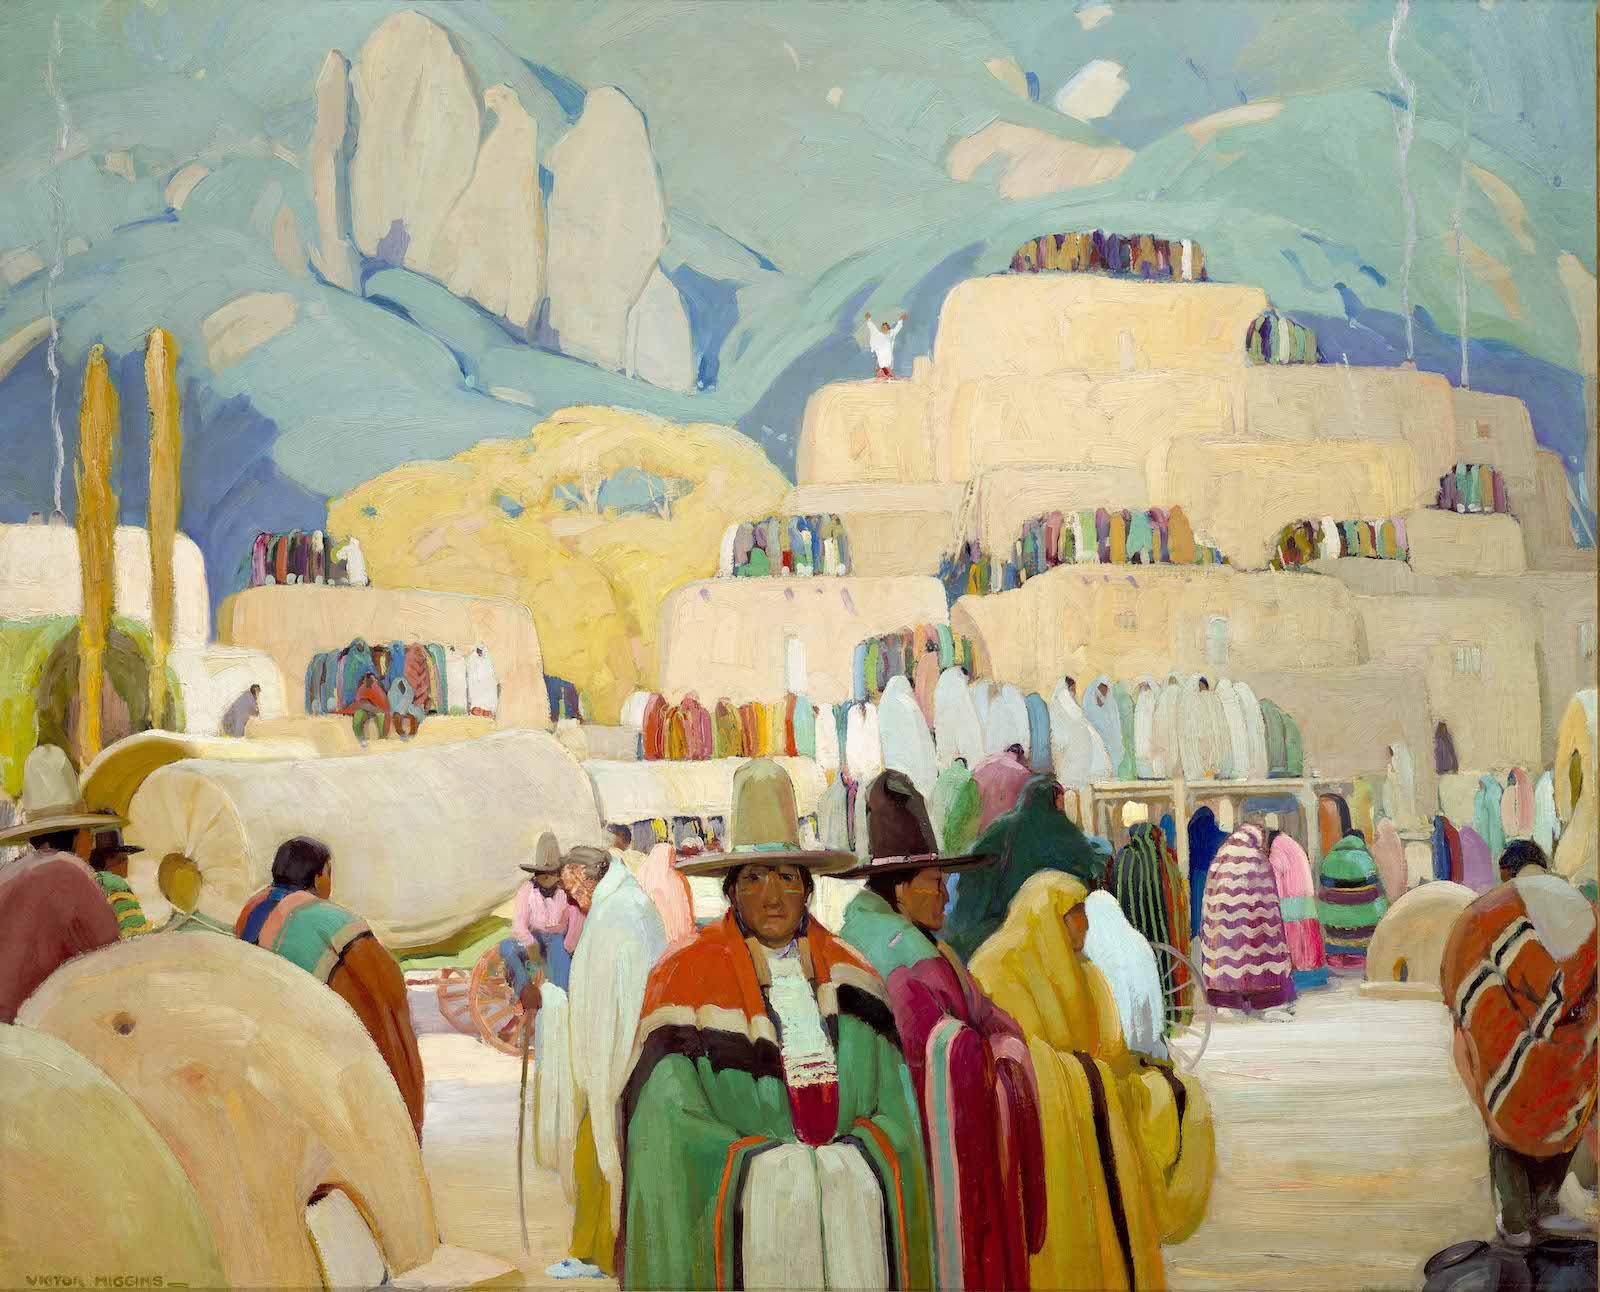 relatively abstract—and beautifully colored with pastels overall and rich jewel-esq skin tones and clothes—view of the indigenous peoples of the Pueblo region